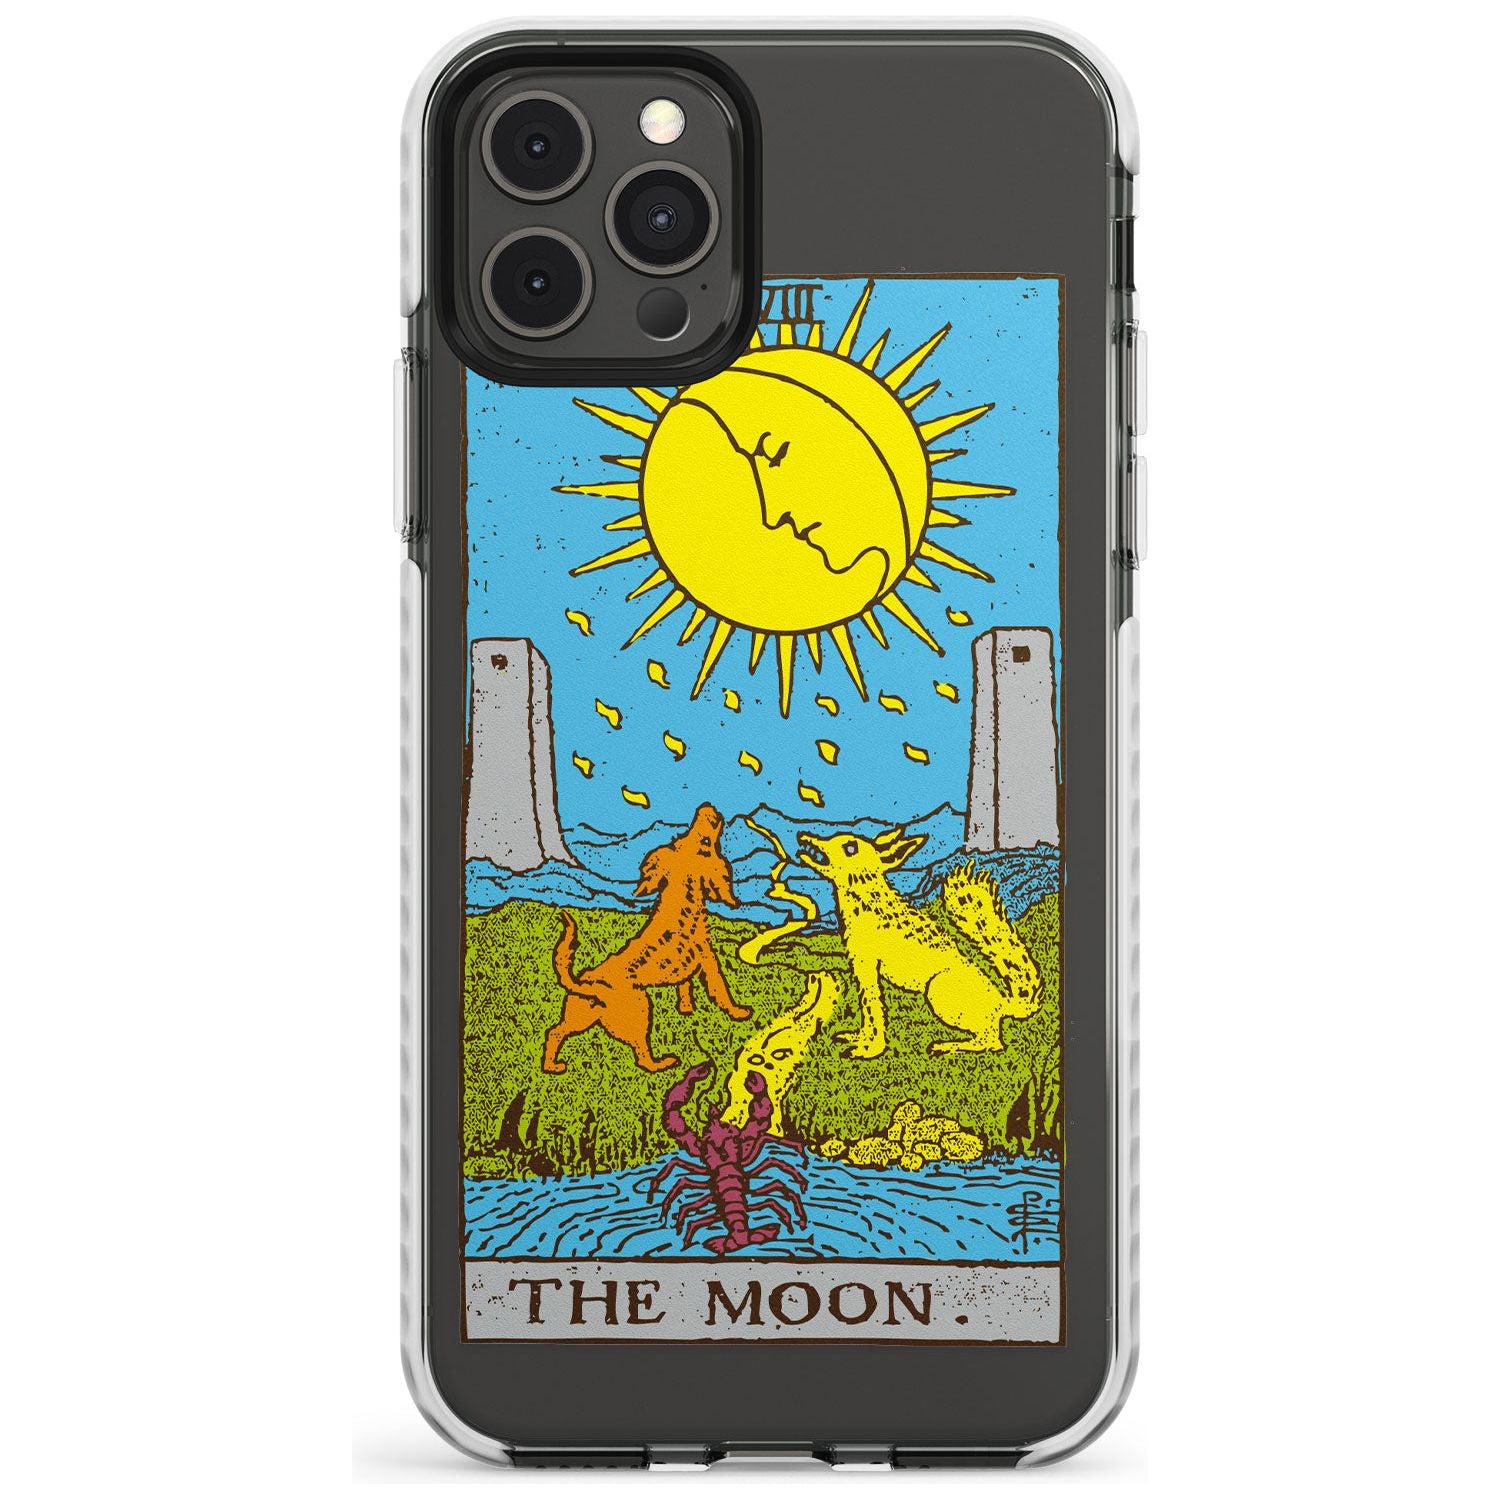 The Moon Tarot Card - Colour Slim TPU Phone Case for iPhone 11 Pro Max